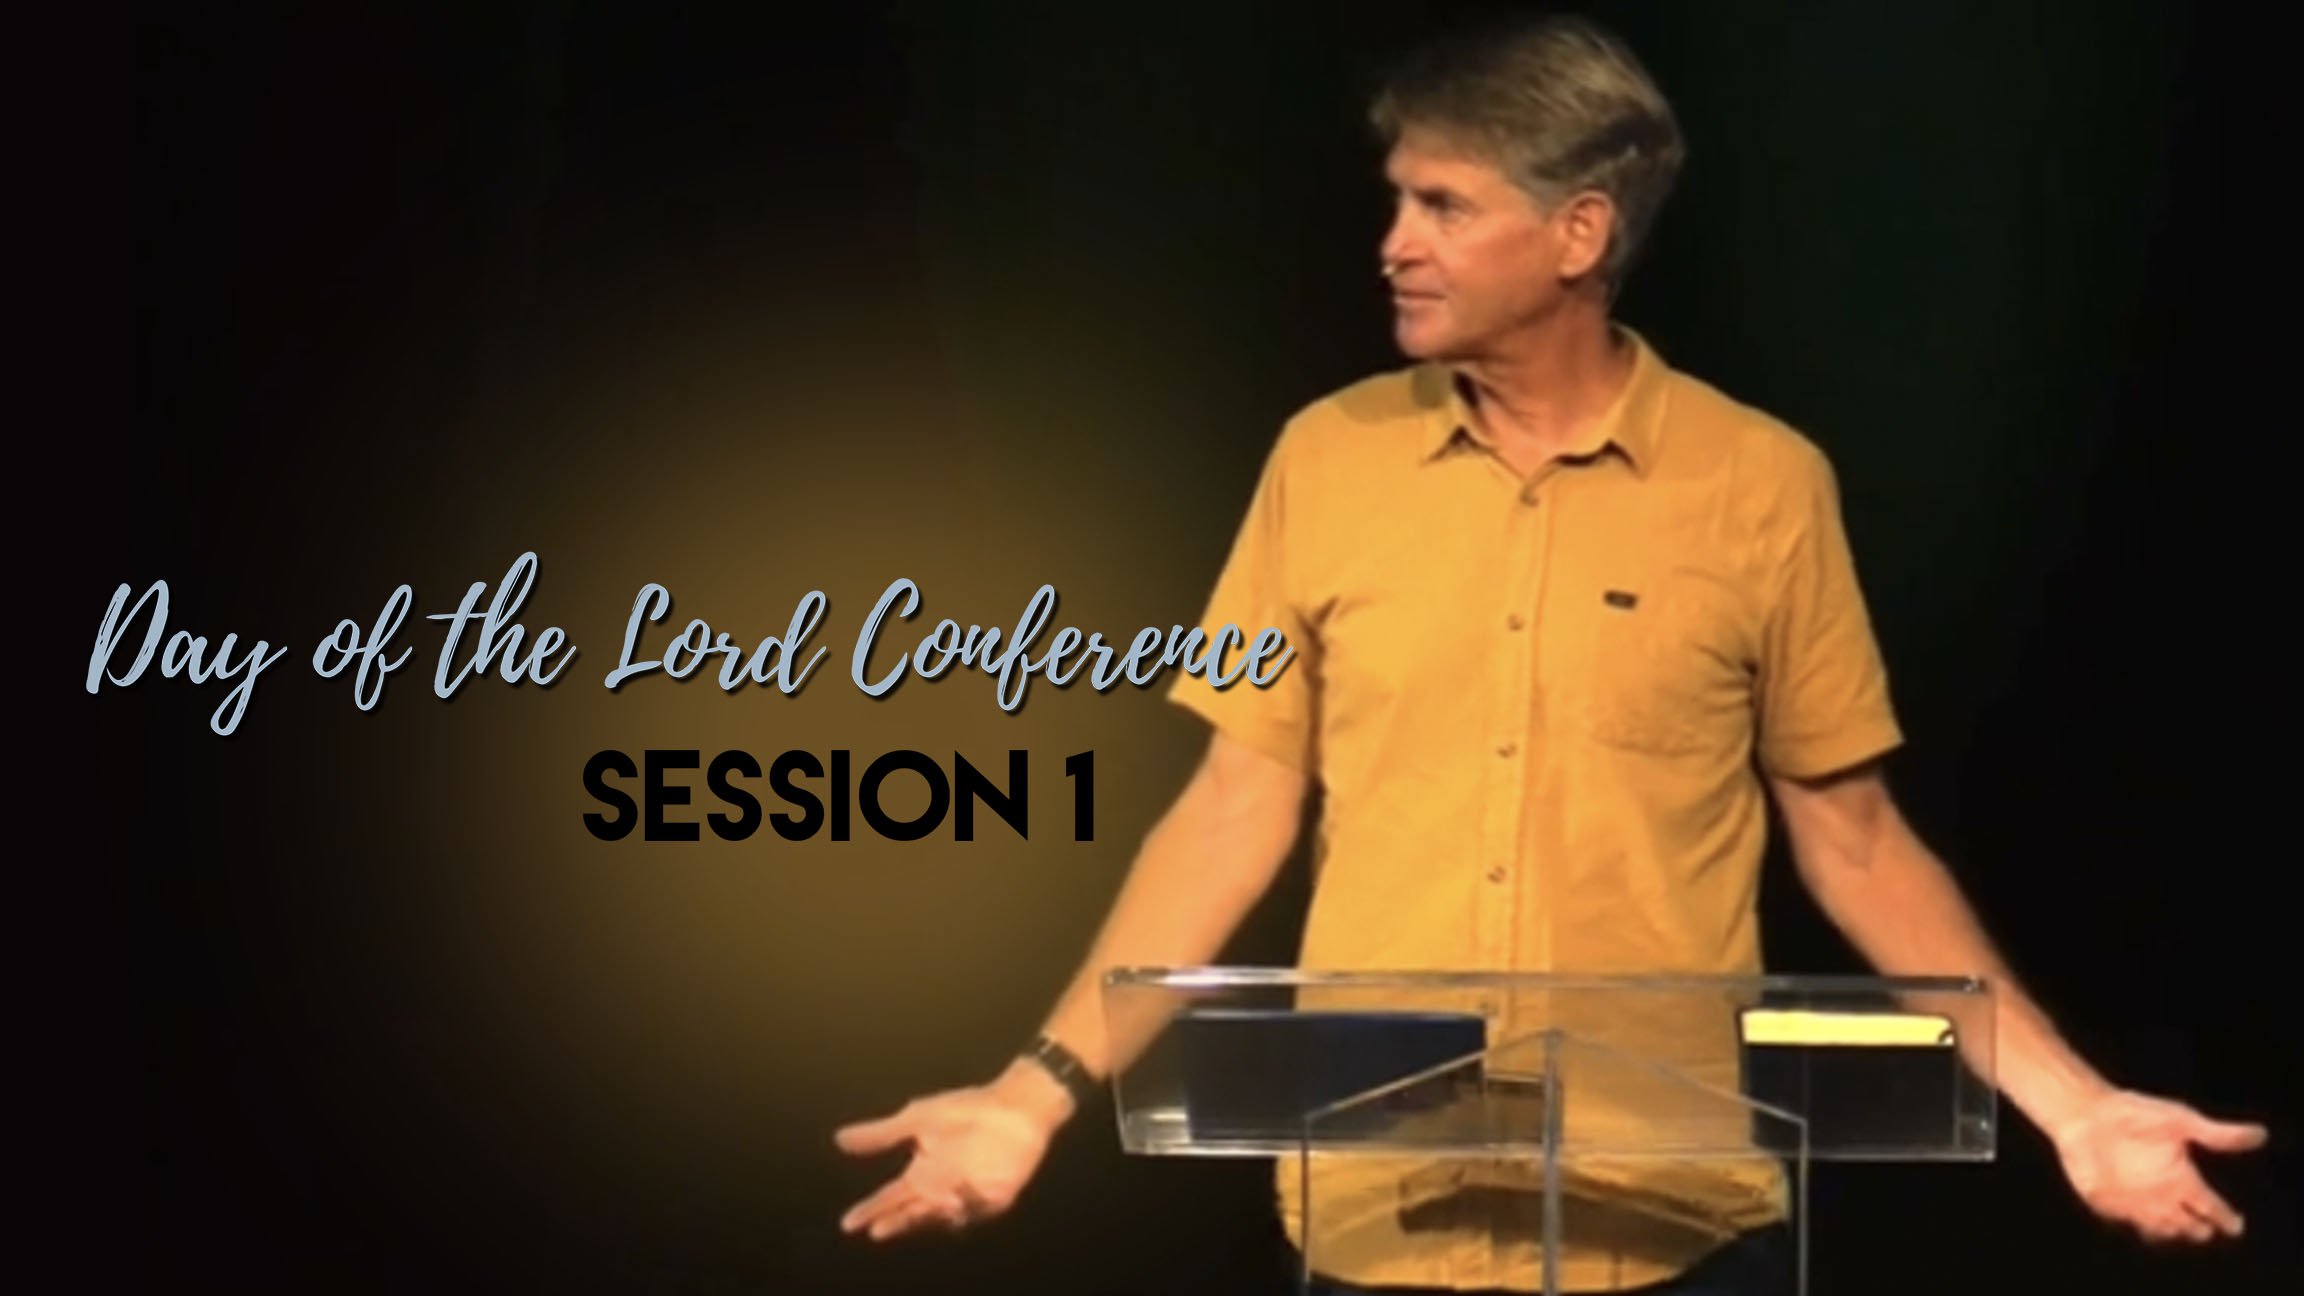 The Day of the Lord – Session 1